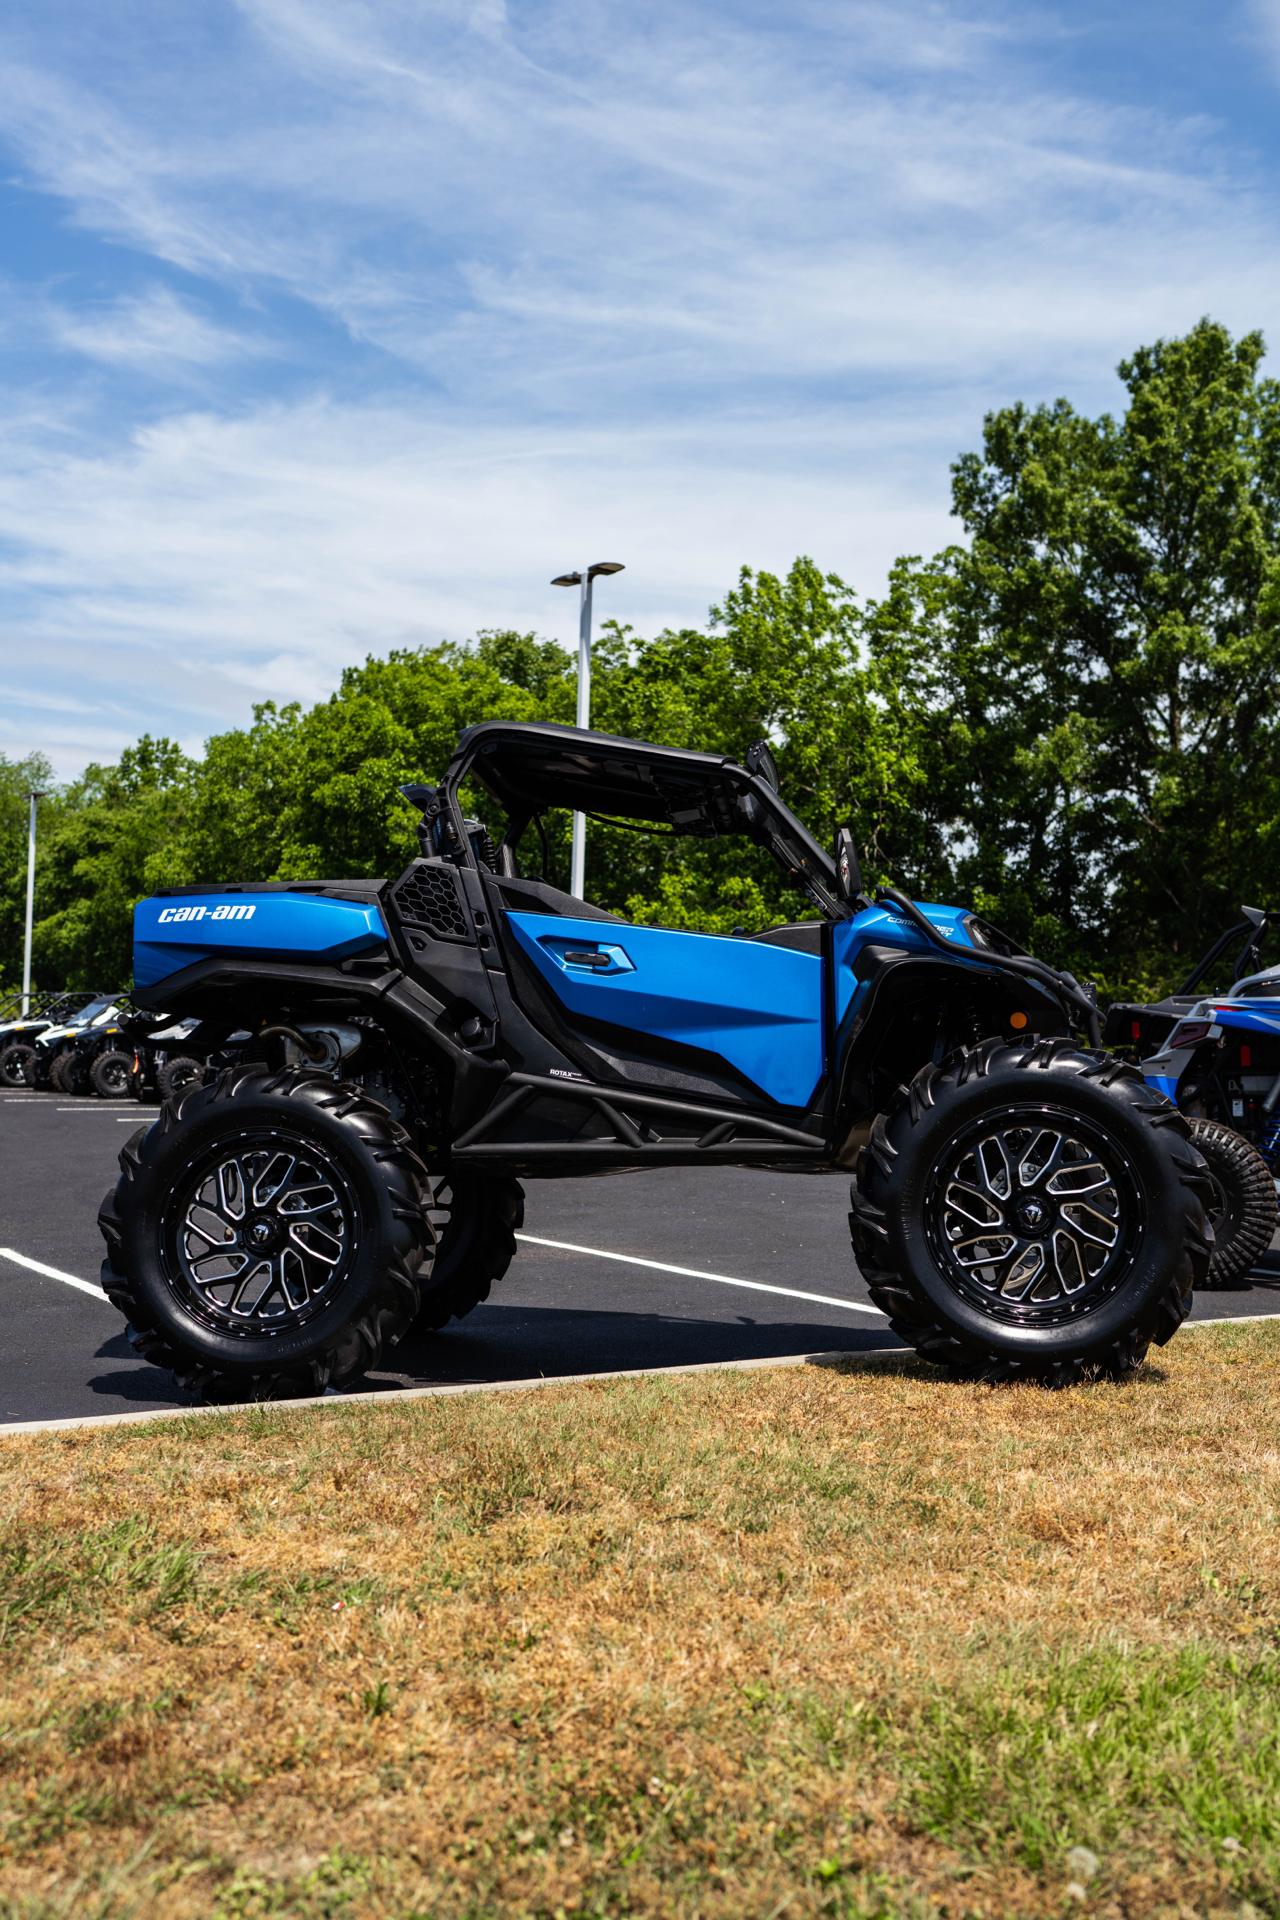 2021 Can-Am Commander 1000 R XT in Florence, South Carolina - Photo 2